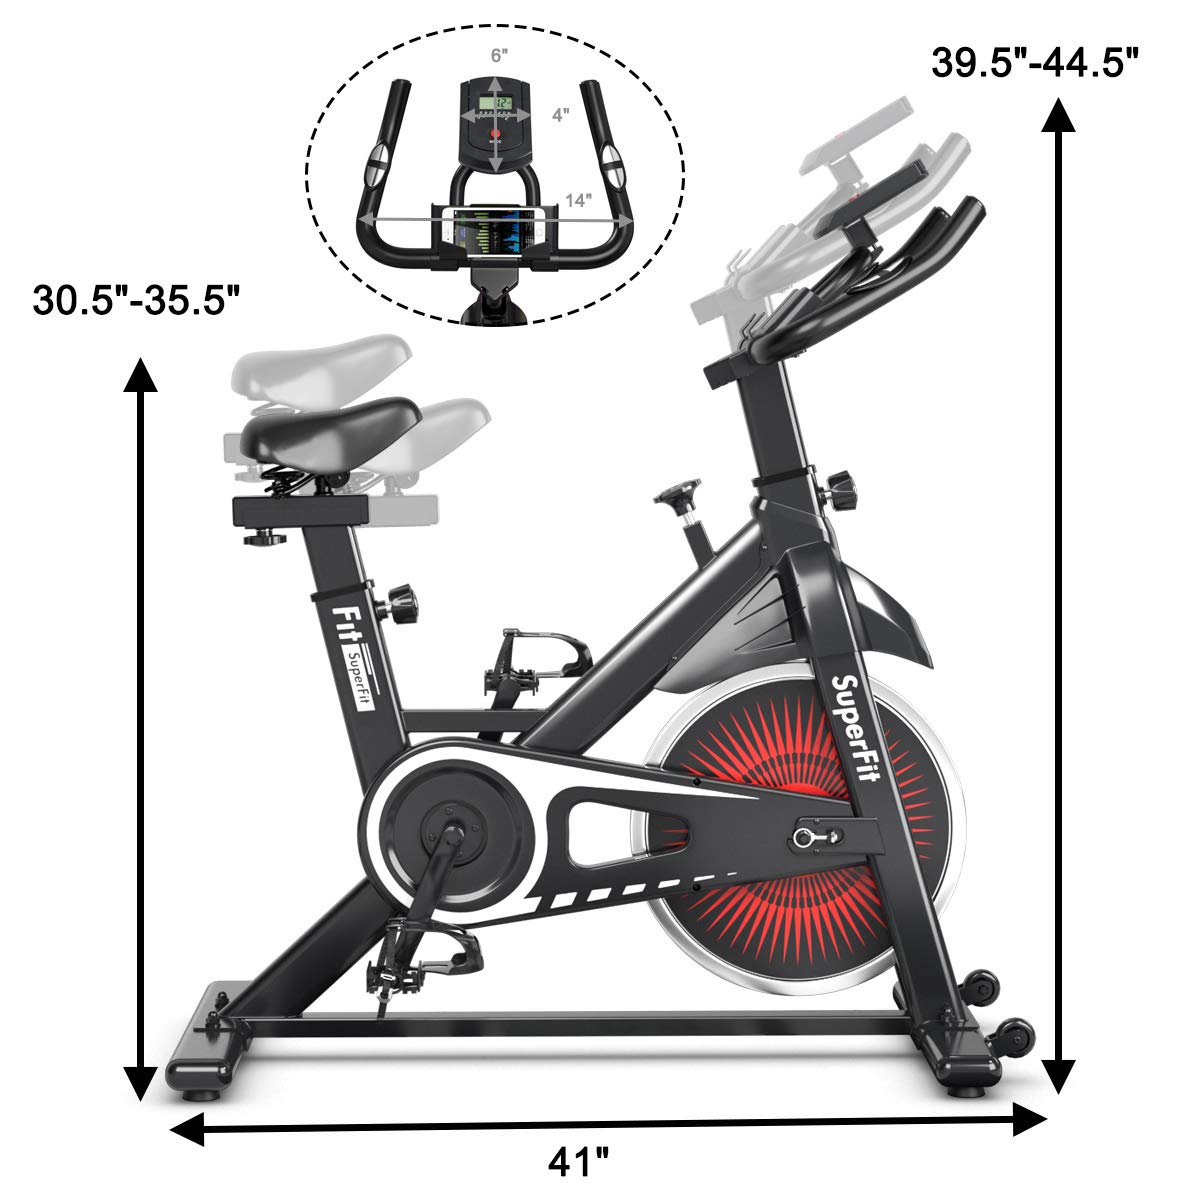 Goplus Indoor Cycling Bike, Silent Belt Drive Exercise Bike Stationary Bicycle with Steel Flywheel, Phone Holder, Adjustable Seat and Handlebar, LCD Monitor, Heart Rate Monitor (Black + White)